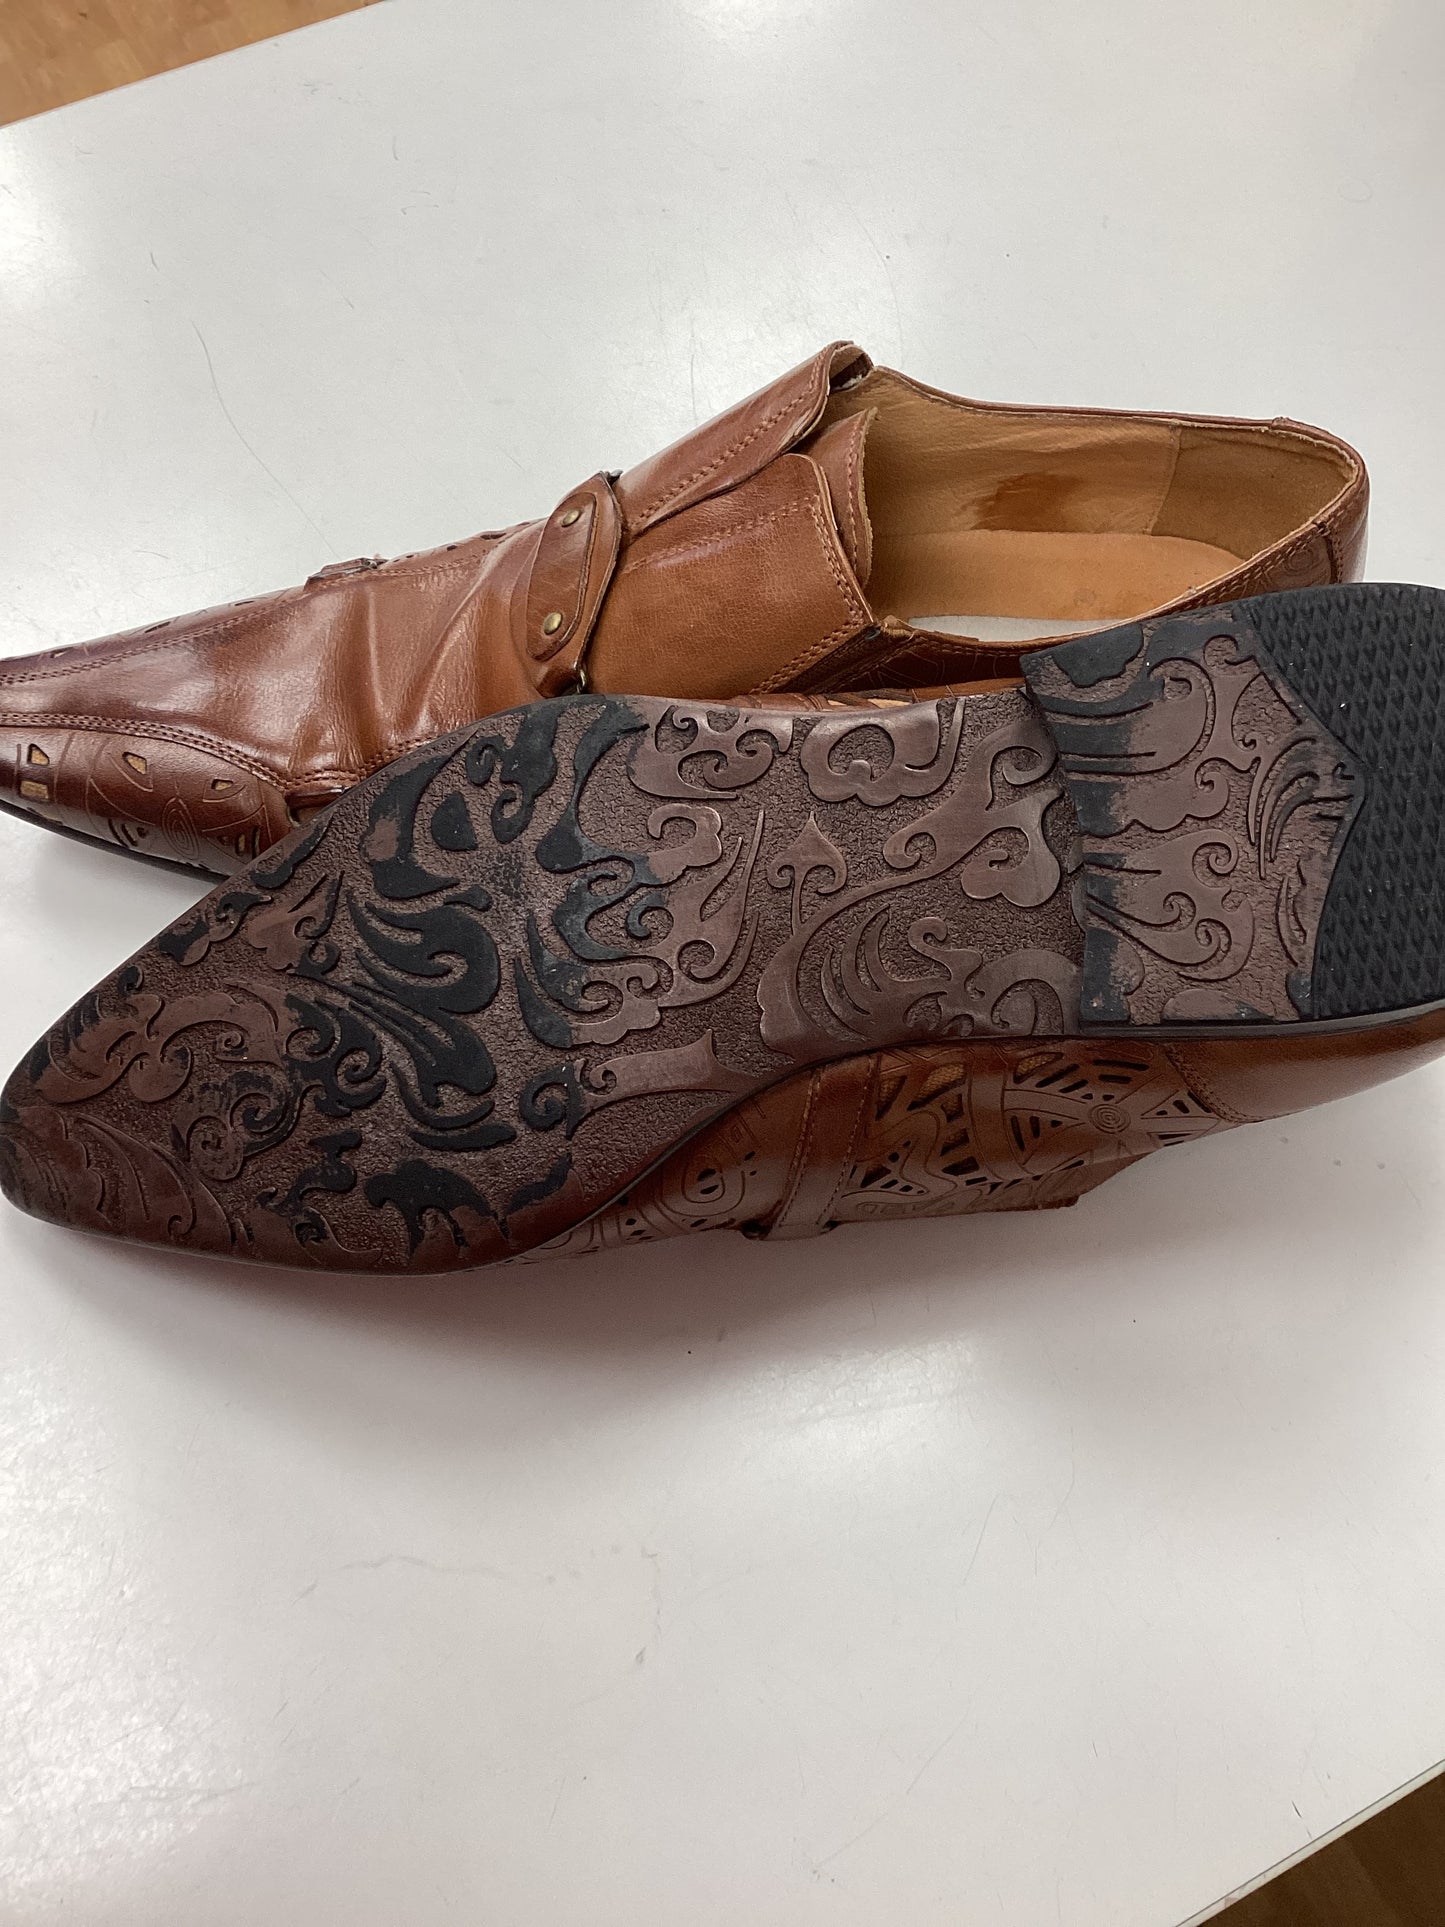 Gucinari Leather Shoes Size 9